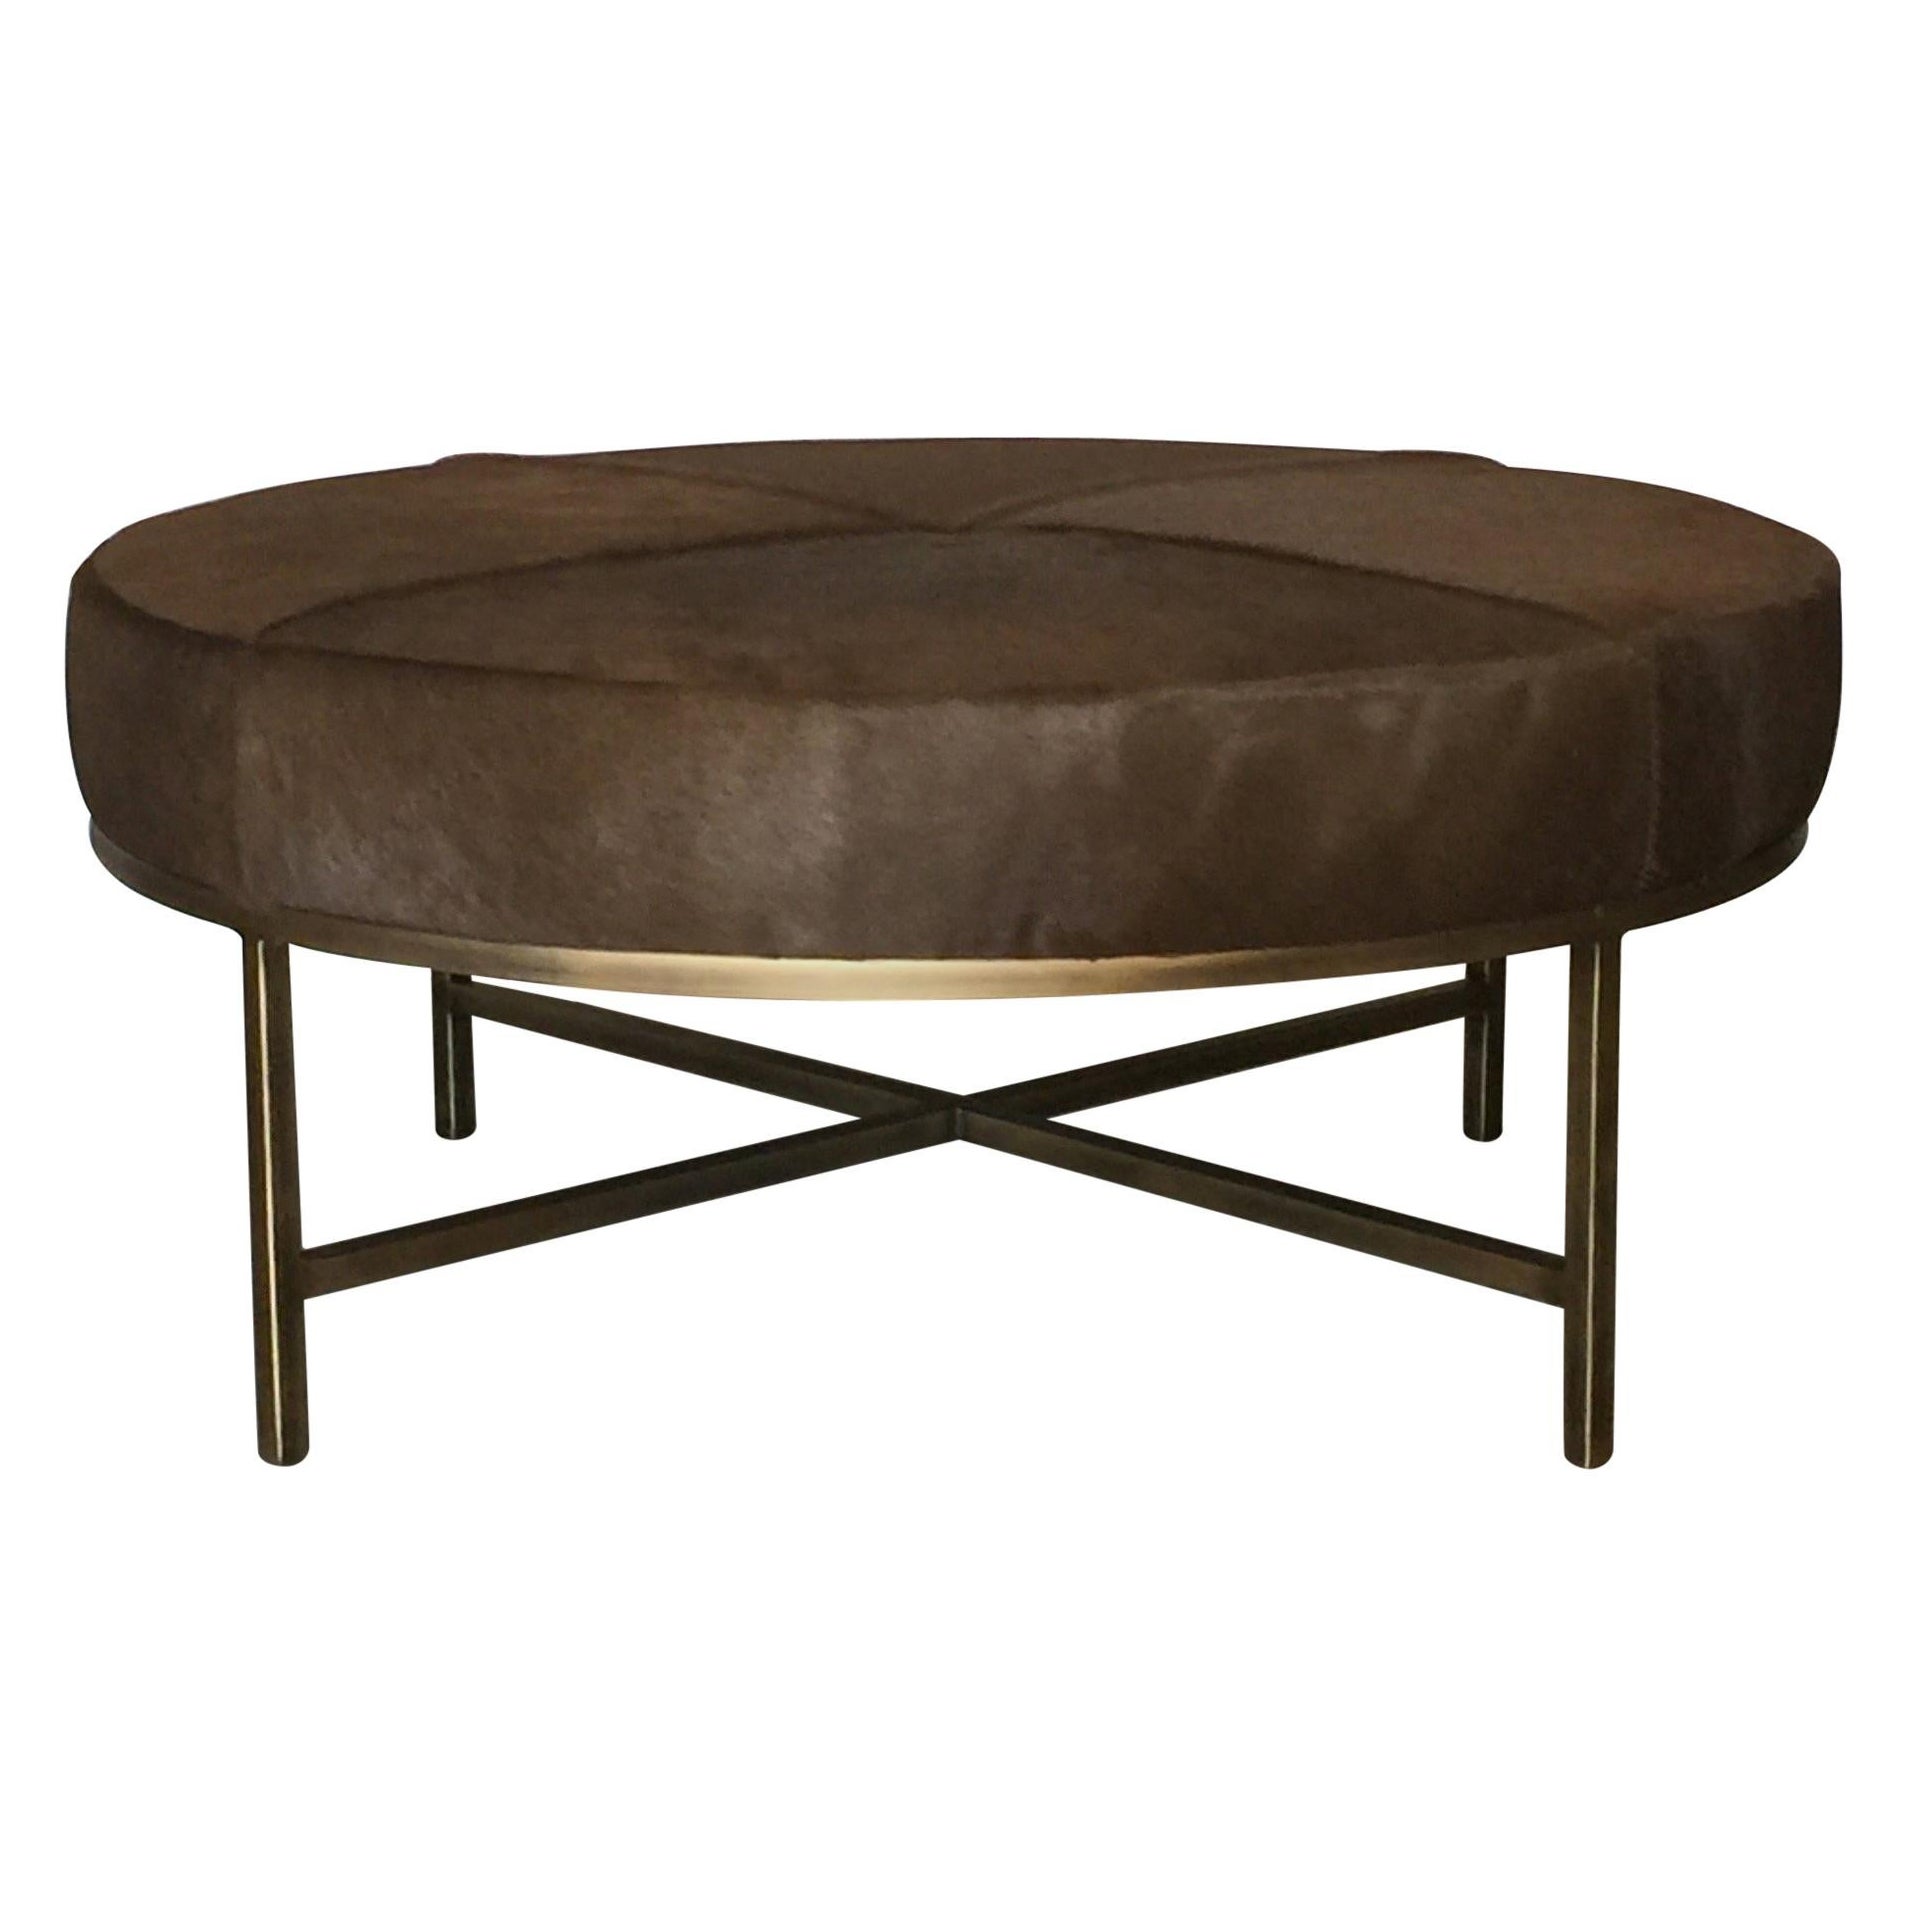 Medium 'Tambour' Antiqued Brass and Hide Ottoman by Design Frères For Sale